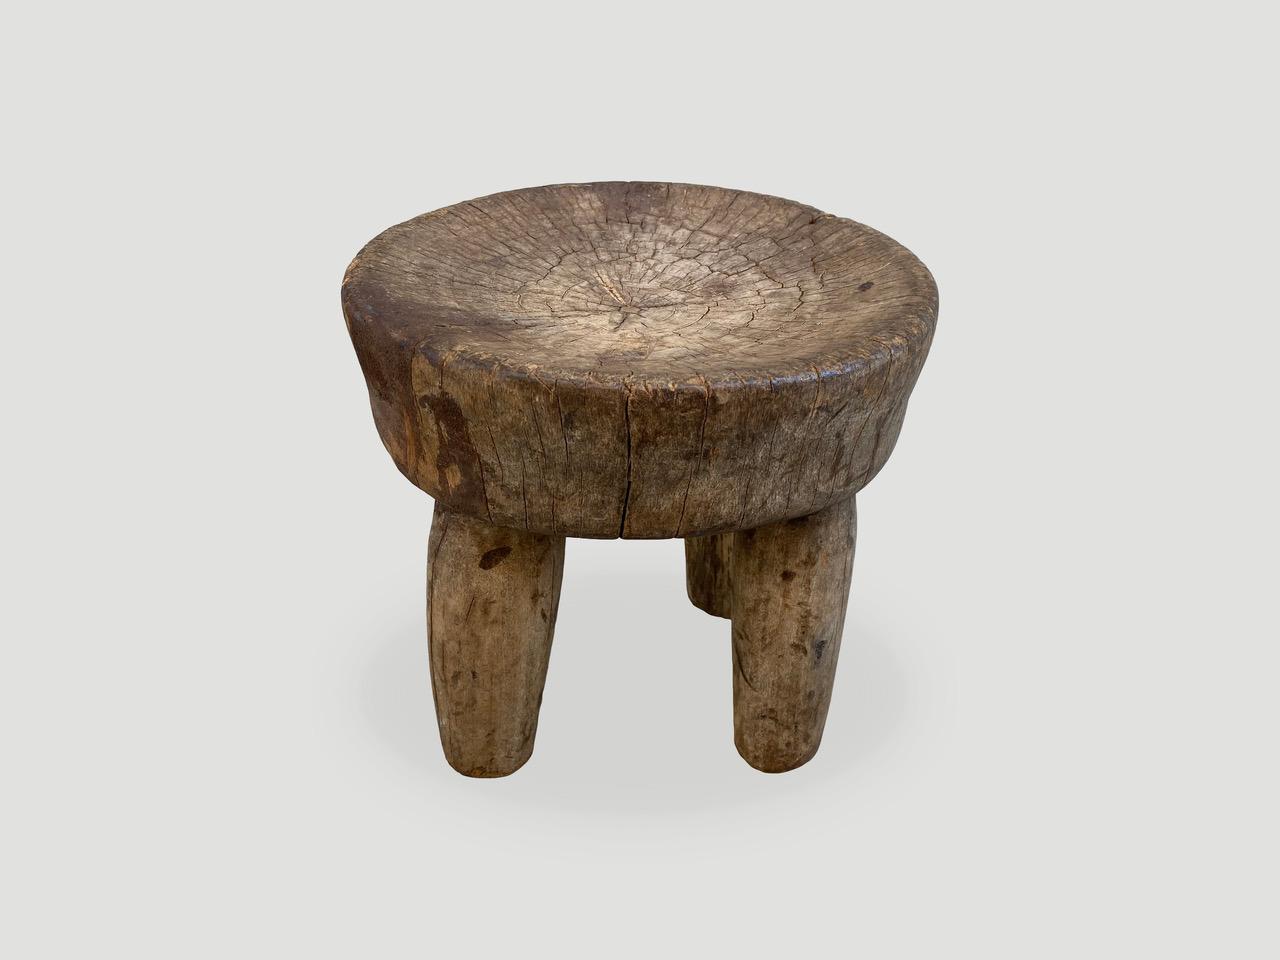 Antique African side table or stool, hand carved from a single block of wood celebrating the cracks and crevices that time and loving use have left behind. We only source the best.

This side table or stool was sourced in the spirit of wabi-sabi,